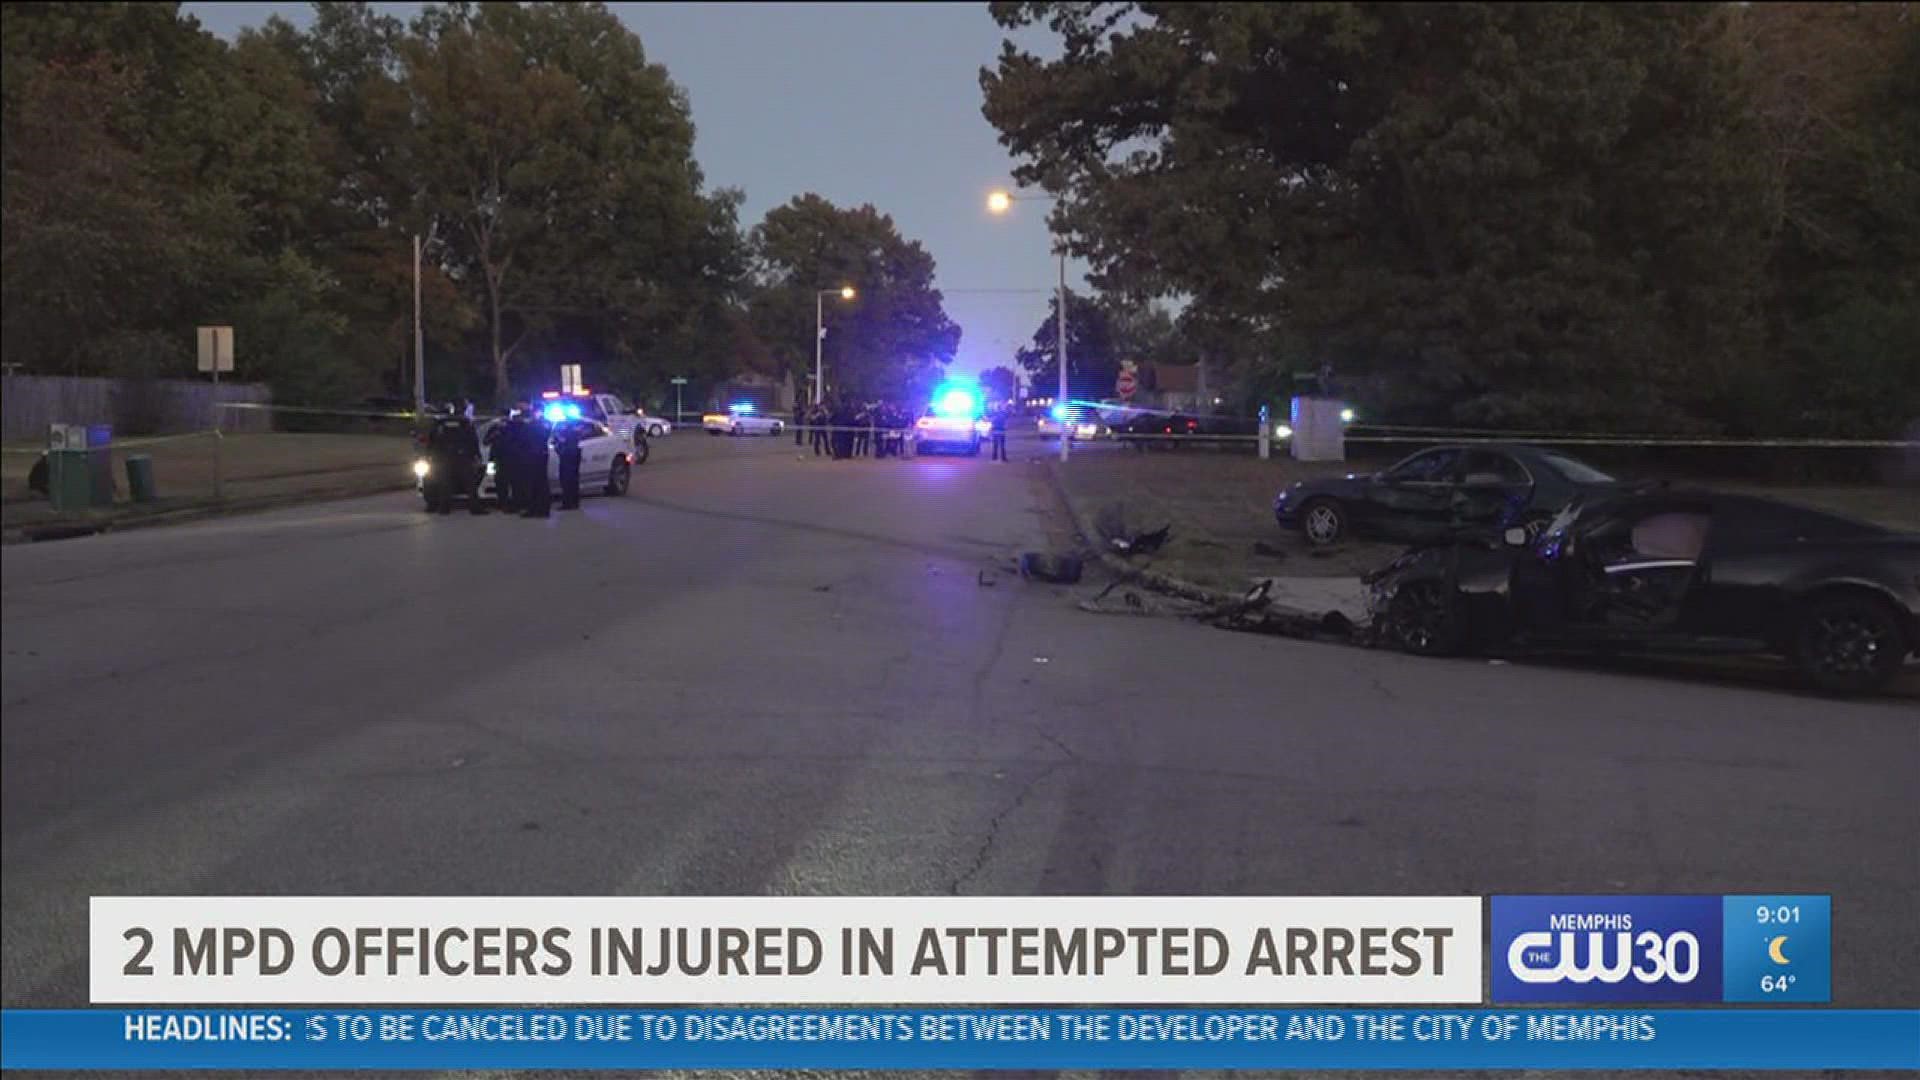 Memphis police said officers surrounded a black Infiniti before the driver struck one of the officers and hit two other squad cars.